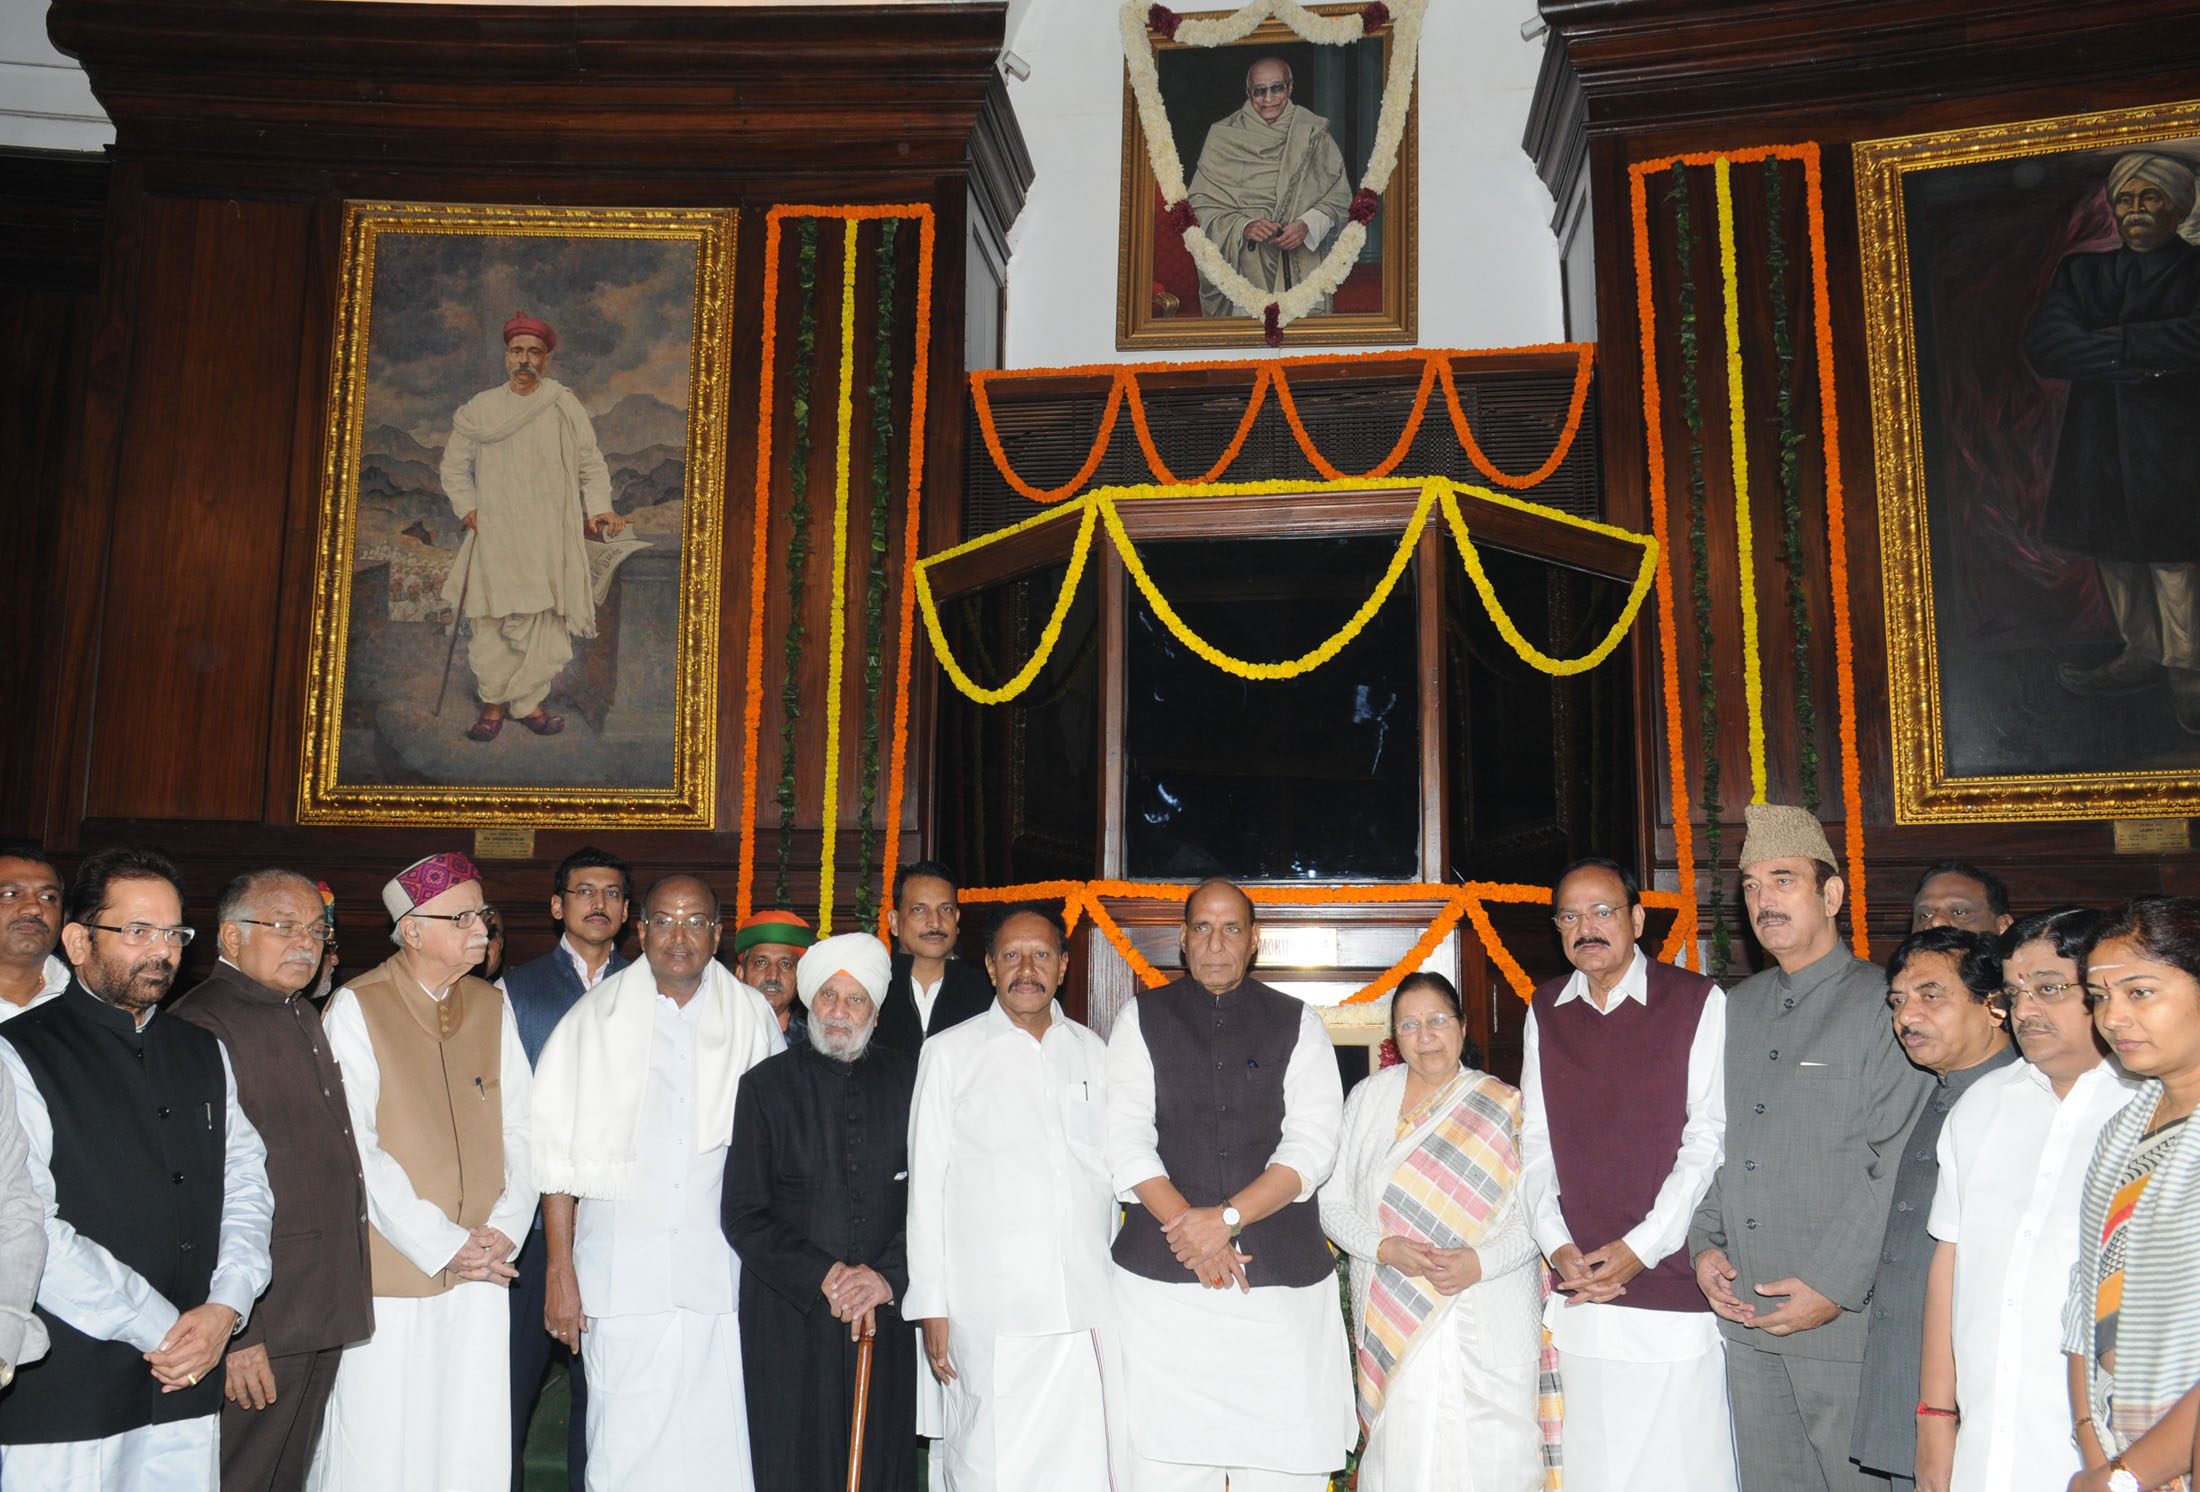 The Speaker, Lok Sabha, Smt. Sumitra Mahajan, the Union Home Minister, Shri Rajnath Singh, the Union Minister for Urban Development, Housing and Urban Poverty Alleviation and Parliamentary Affairs, Shri M. Venkaiah Naidu and other dignitaries paid tribute at the portrait of Shri C. Rajagopalachari, on his Birth Anniversary, at Parliament House, in New Delhi on December 10, 2015.